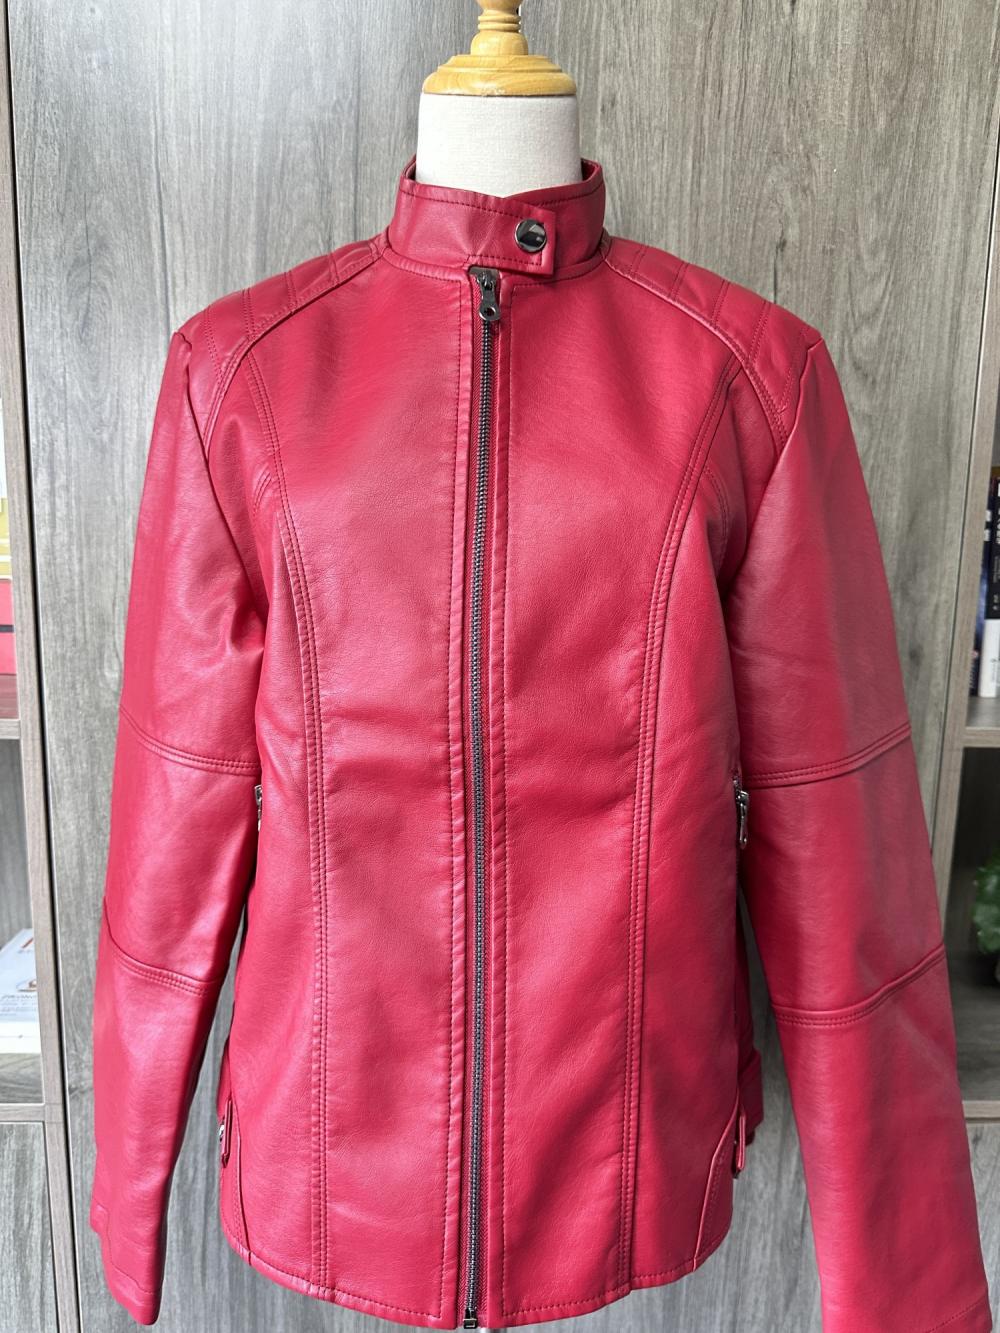 women's real leather jackets sale